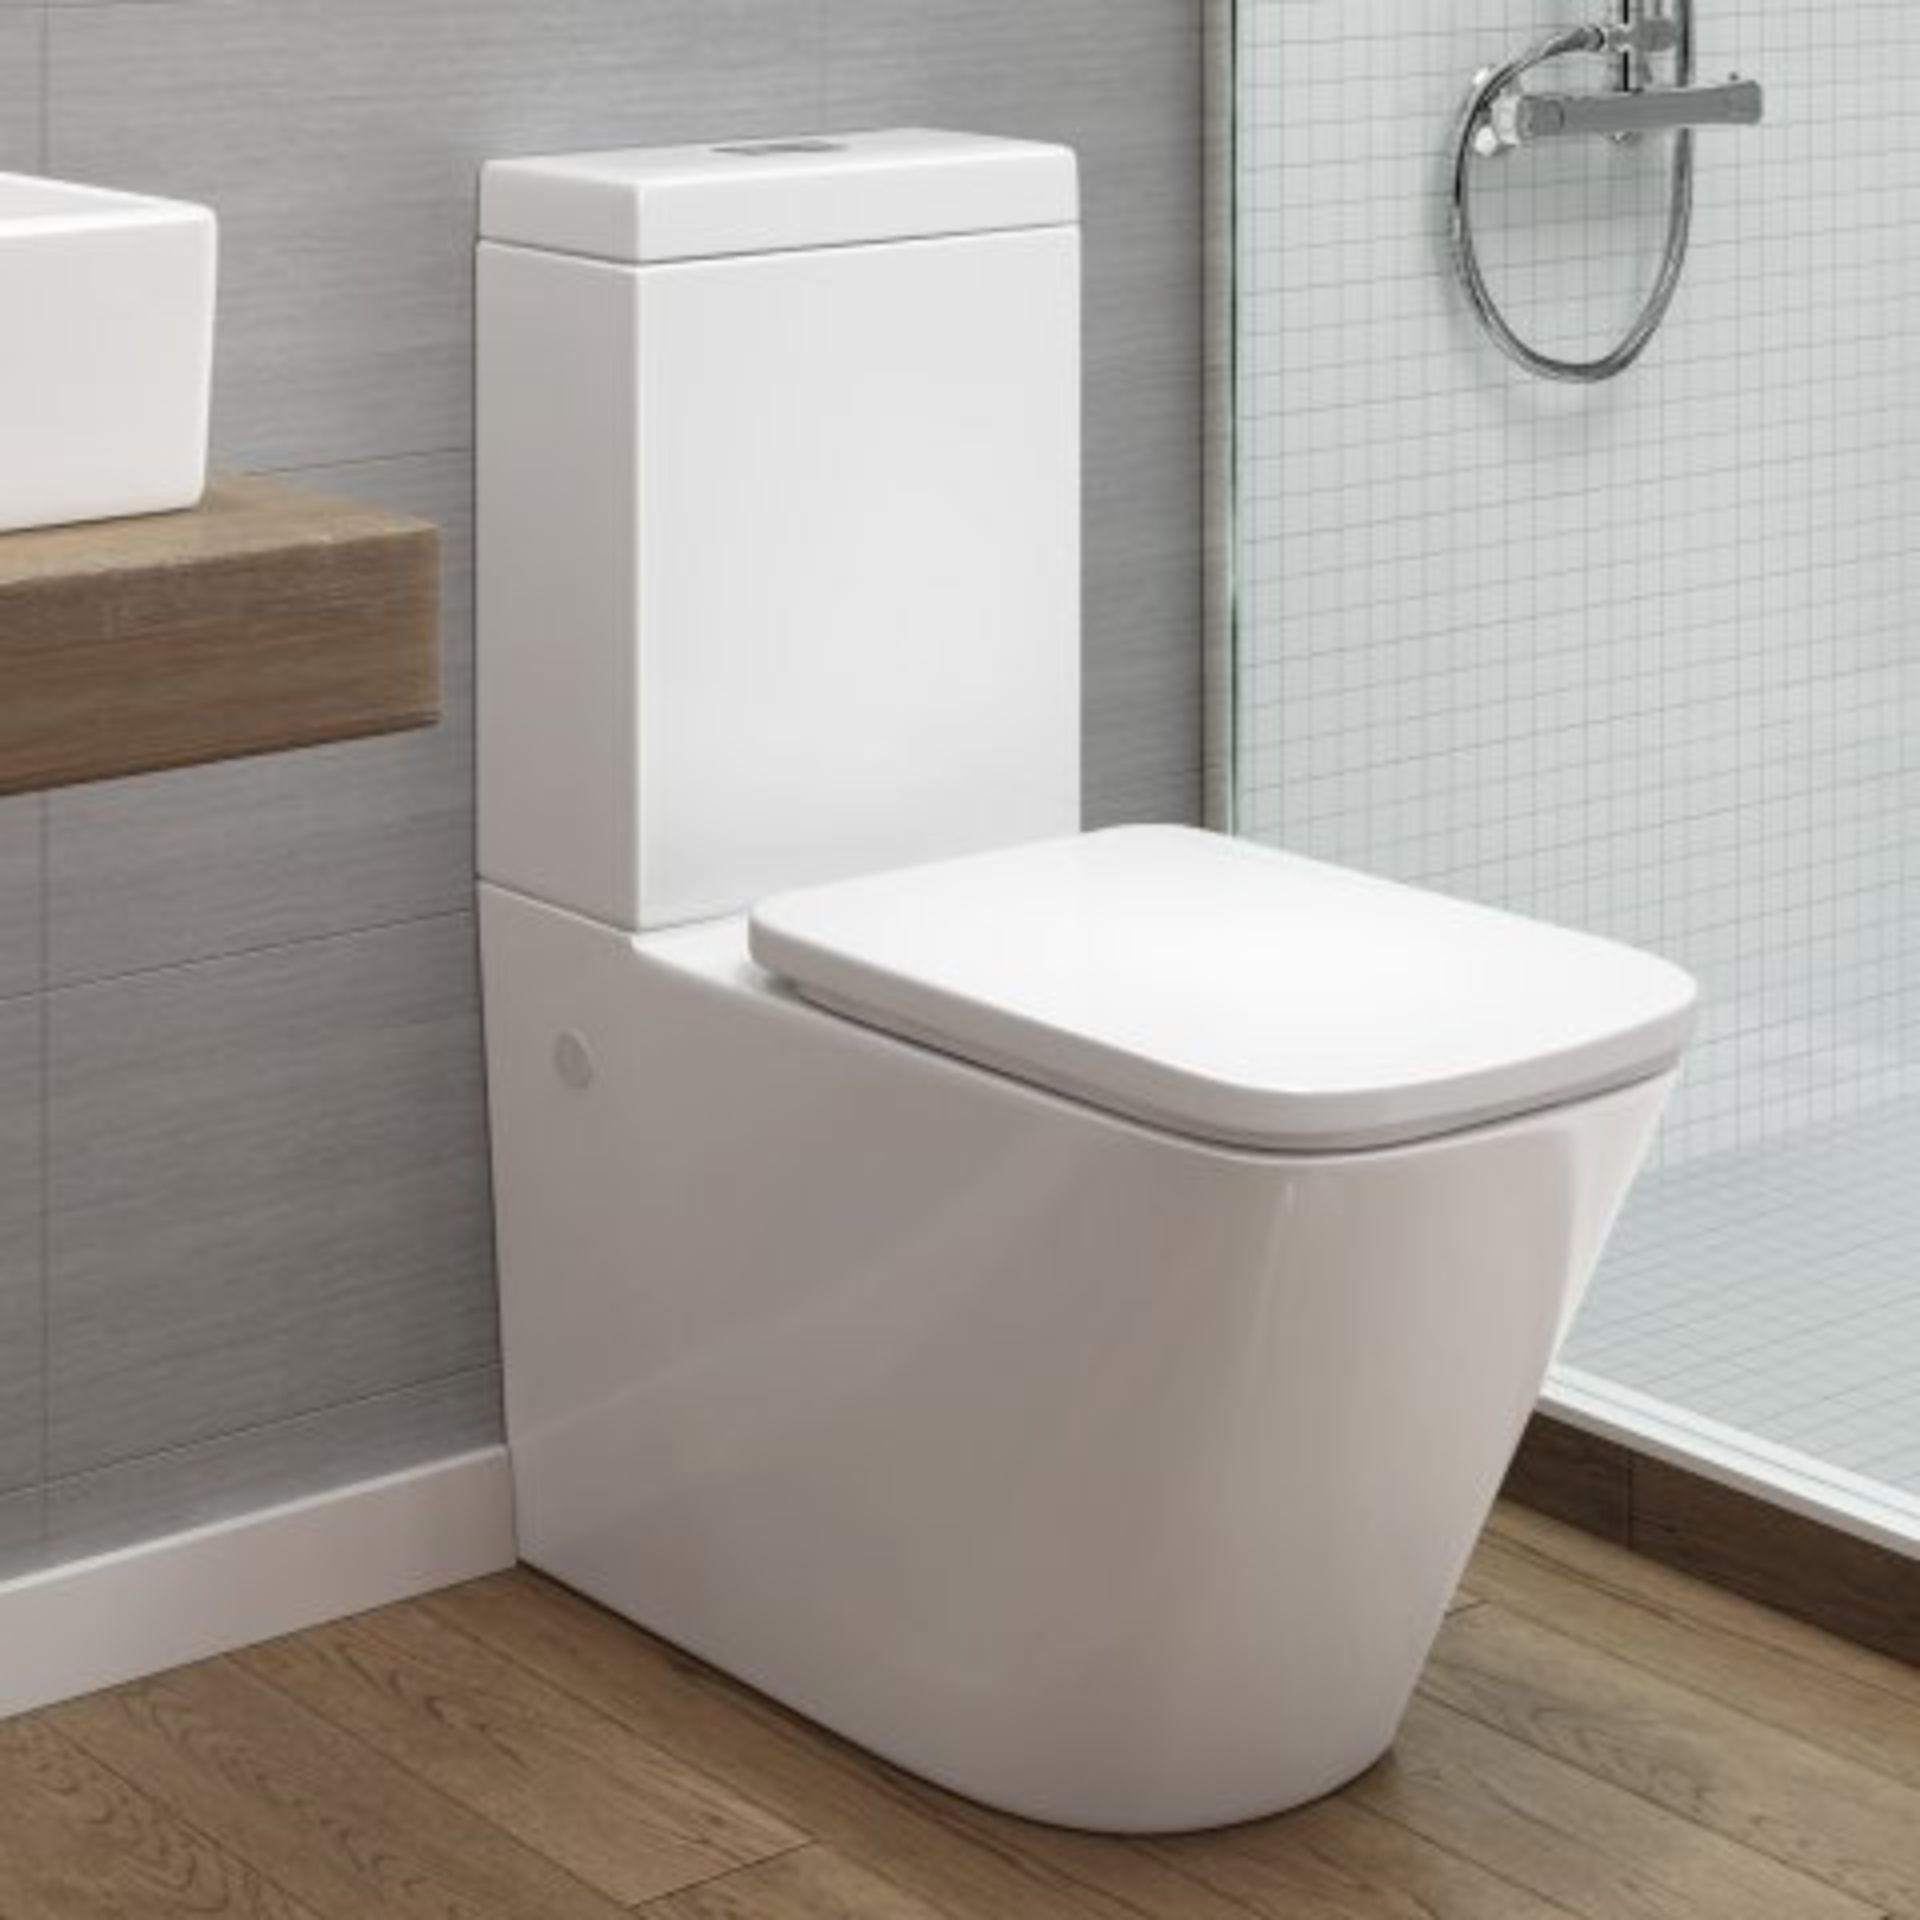 (O54) Florence Close Coupled Toilet & Cistern inc Soft Close Seat. RRP £399.99. Long Lasting Quality